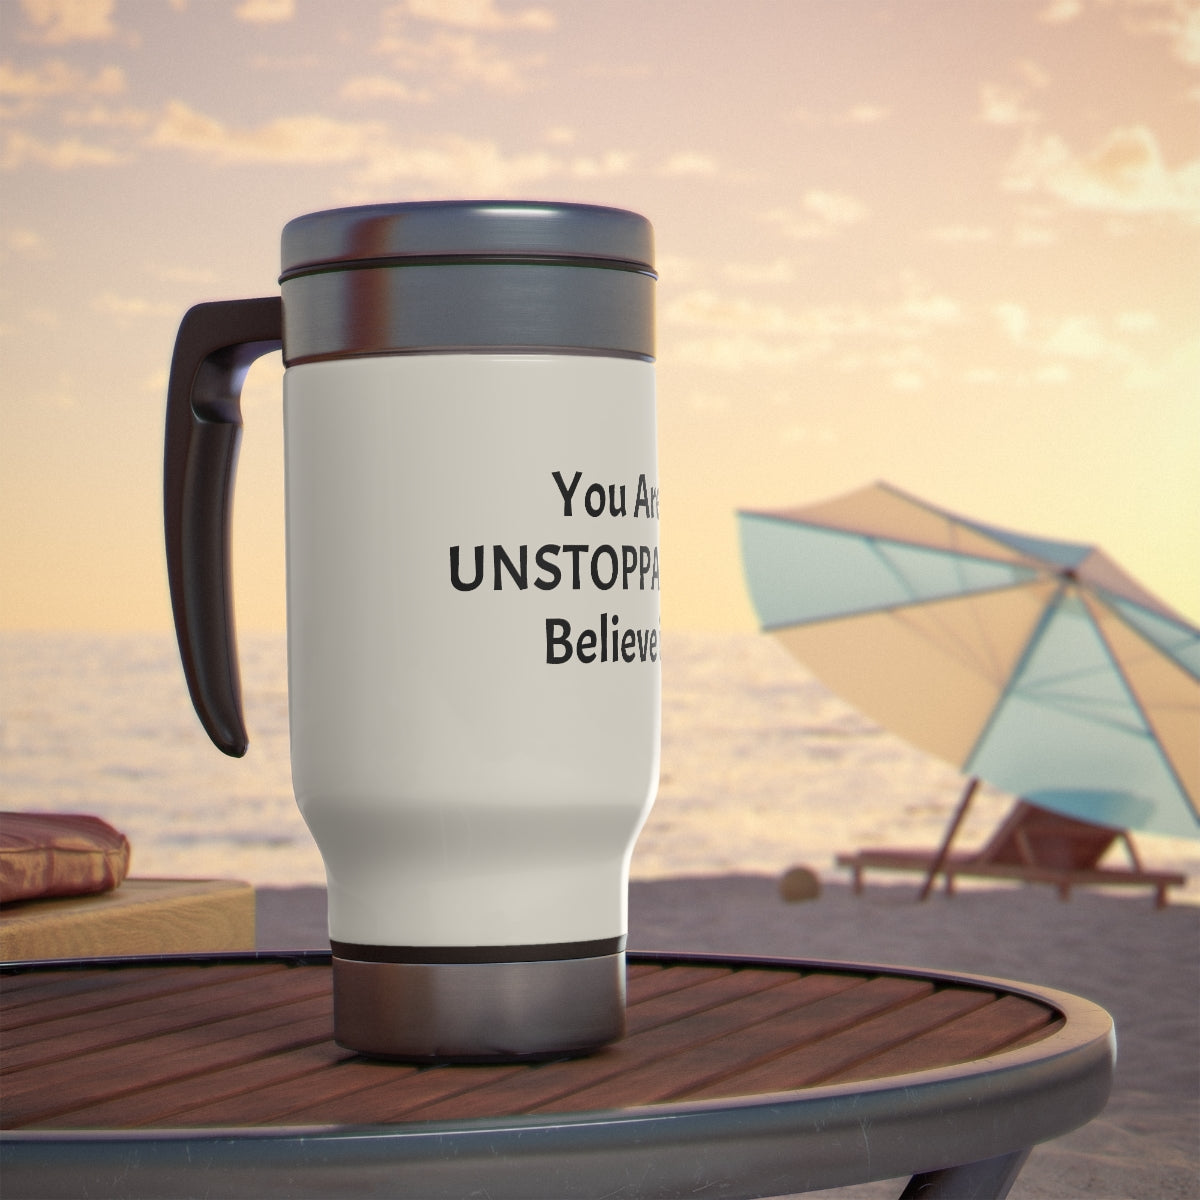 You Are Unstoppable! Stainless Steel Travel Mug with Handle, 14oz